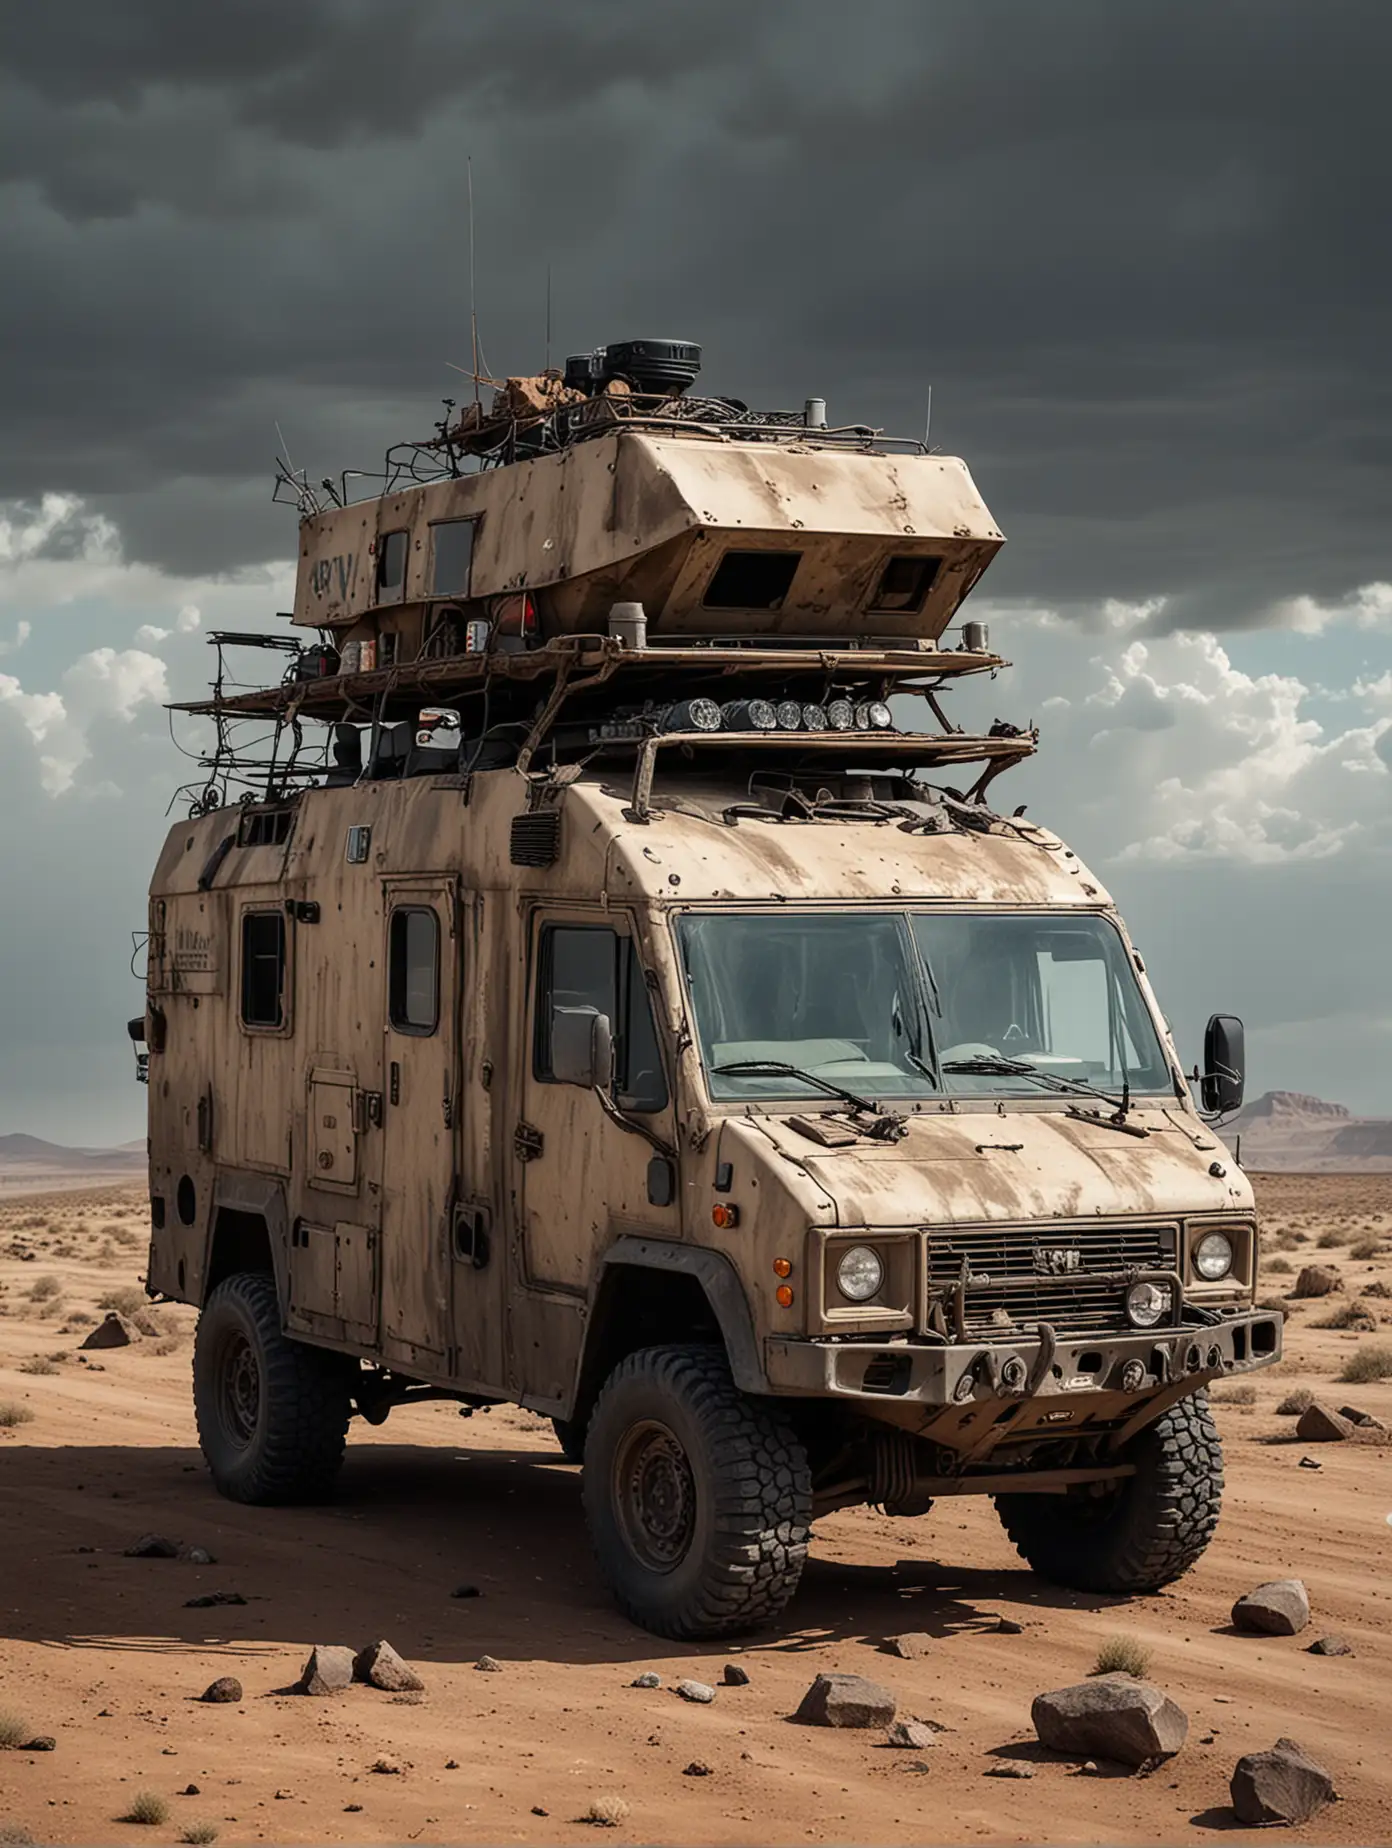 A post-apocalyptic survival RV with a radar on the roof. The vehicle is heavily modified with reinforced steel plates, barbed wire, and various weapons mounted on it. The RV is large and rugged, with large off-road tires, solar panels, and extra fuel tanks attached. The scene is set in a barren, desolate wasteland with a dark, cloudy sky. The RV has various survival gear visible, such as water canisters, storage boxes, and makeshift shelters attached to its sides.